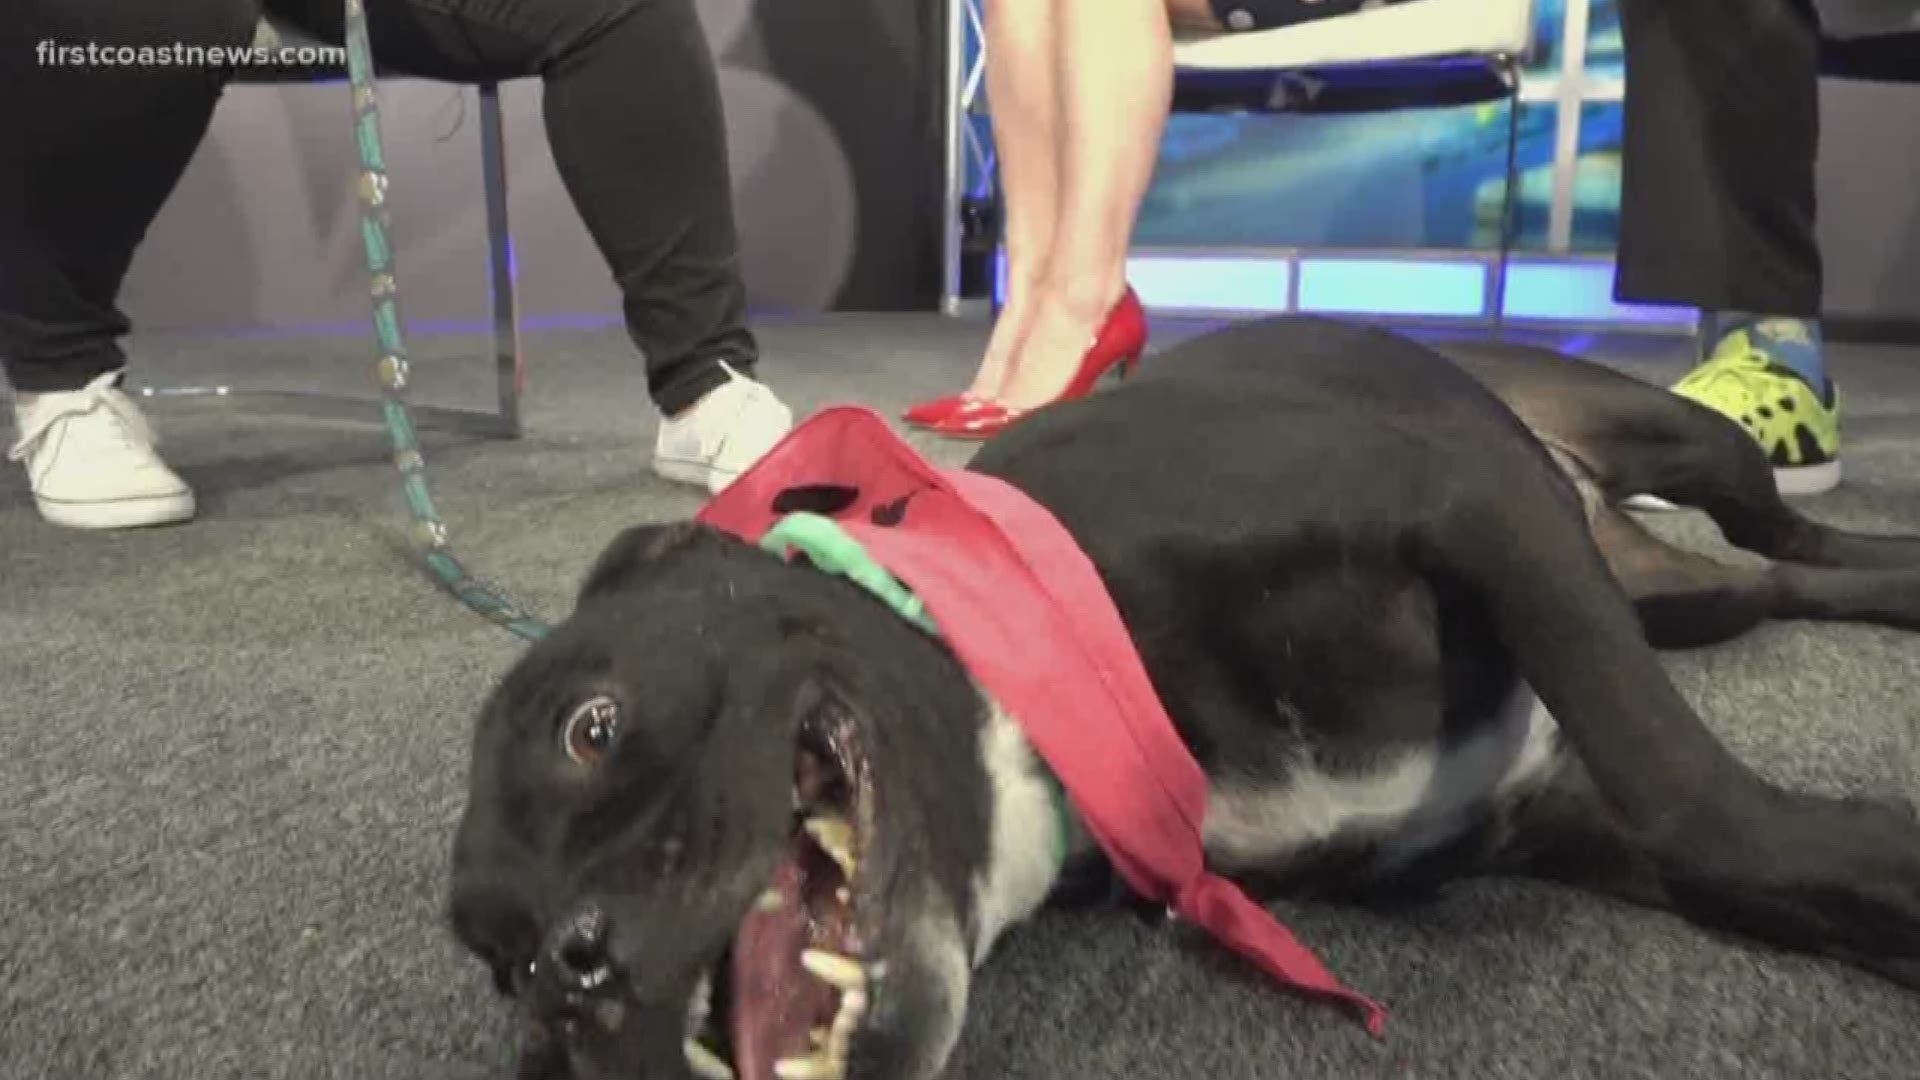 This weeks' "Pet Tails – Pet of The Week" is Dahlia.  She is 6 yrs. old, has a very cute underbite smile, is house trained, loves strangers & people, knows how to sit/stay/lay down and is very fun and energetic.She's available for adoption – contact The Jacksonville Humane Society Sponsored by Fort Family Investments.